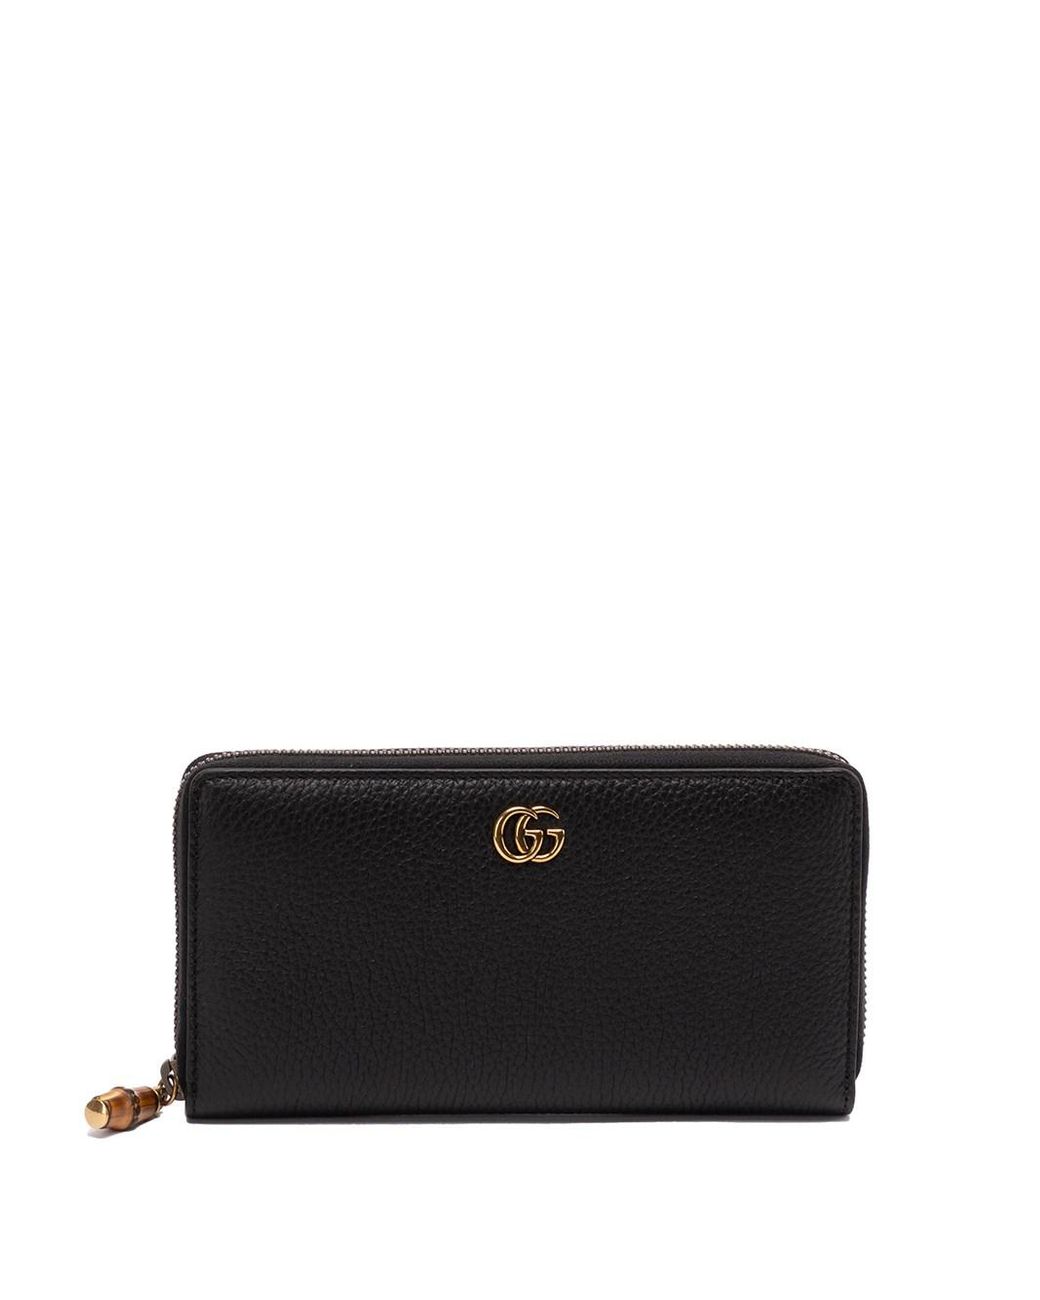 Gucci `bamboo Puller` Zip Around Wallet in Black | Lyst